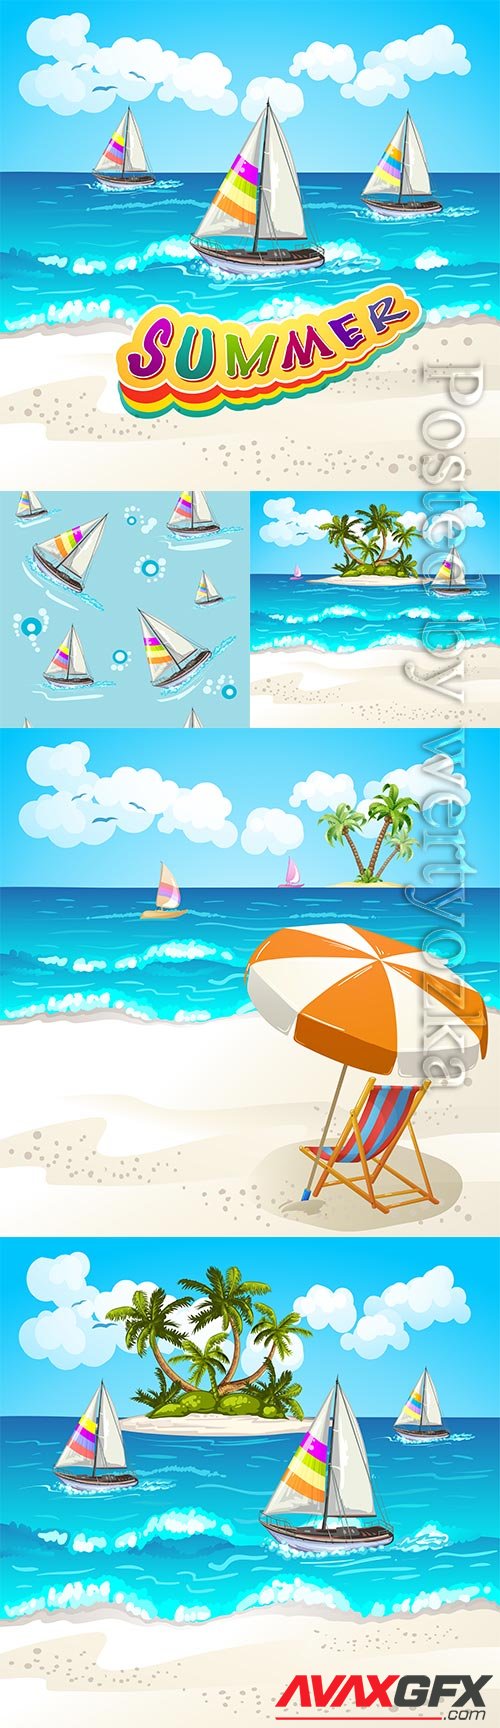 Summer vacation, sea, palm trees, cocktails in vector vol 9